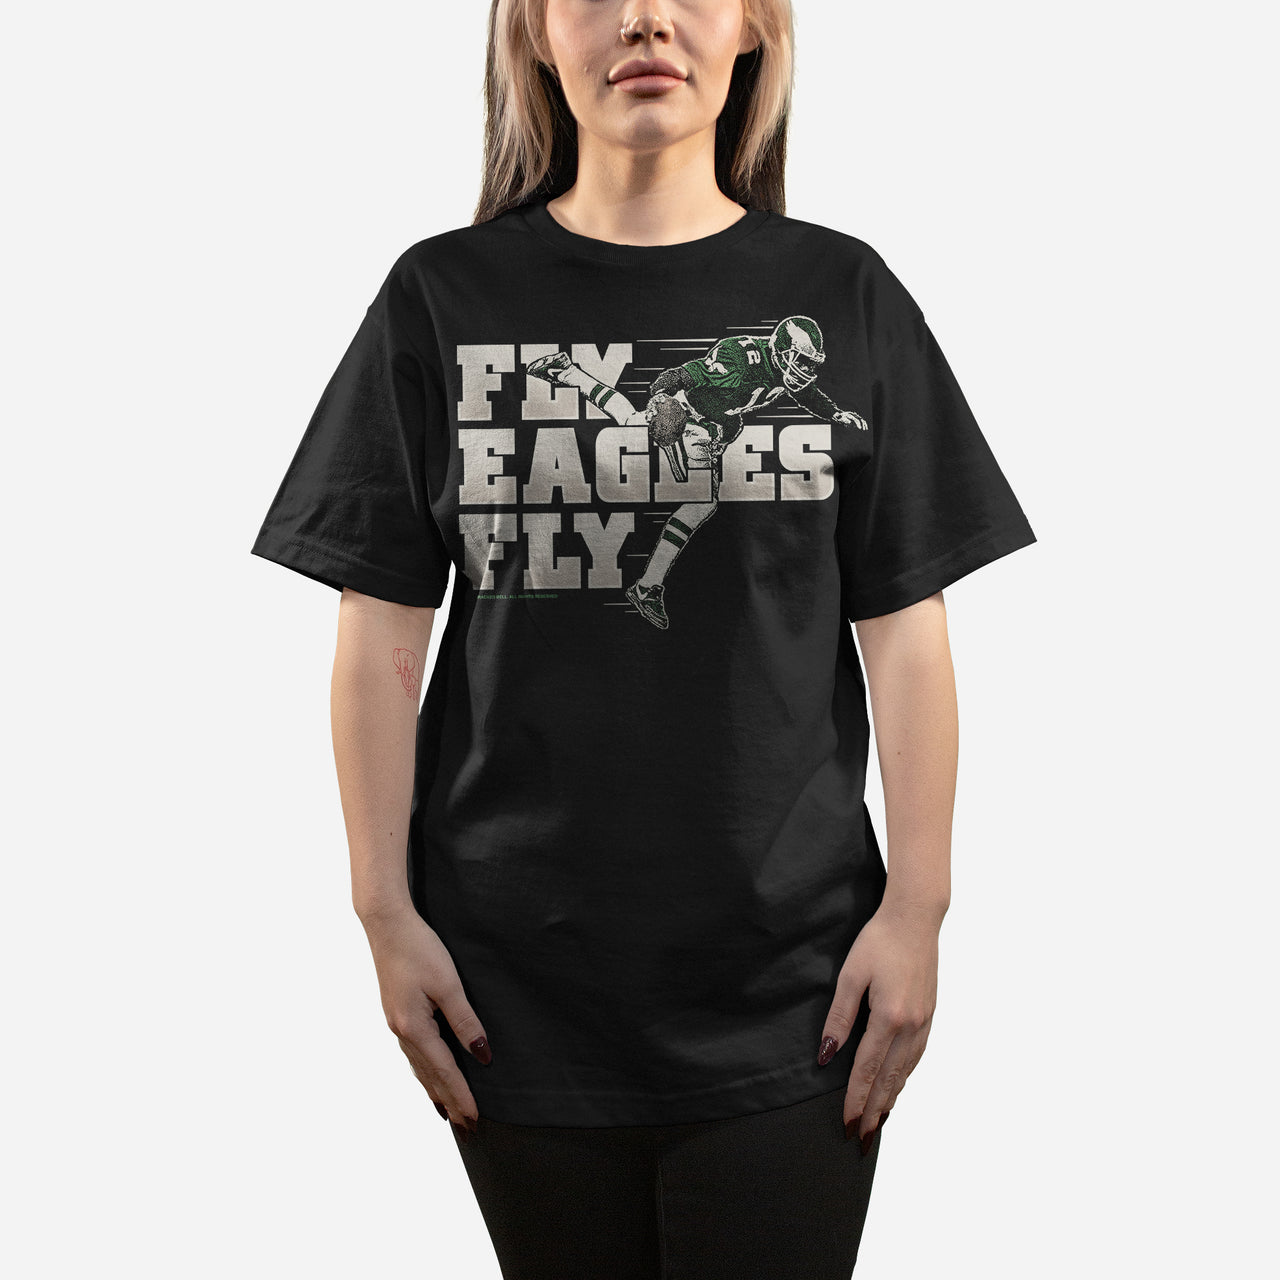 "Fly Eagles Fly" Shirt